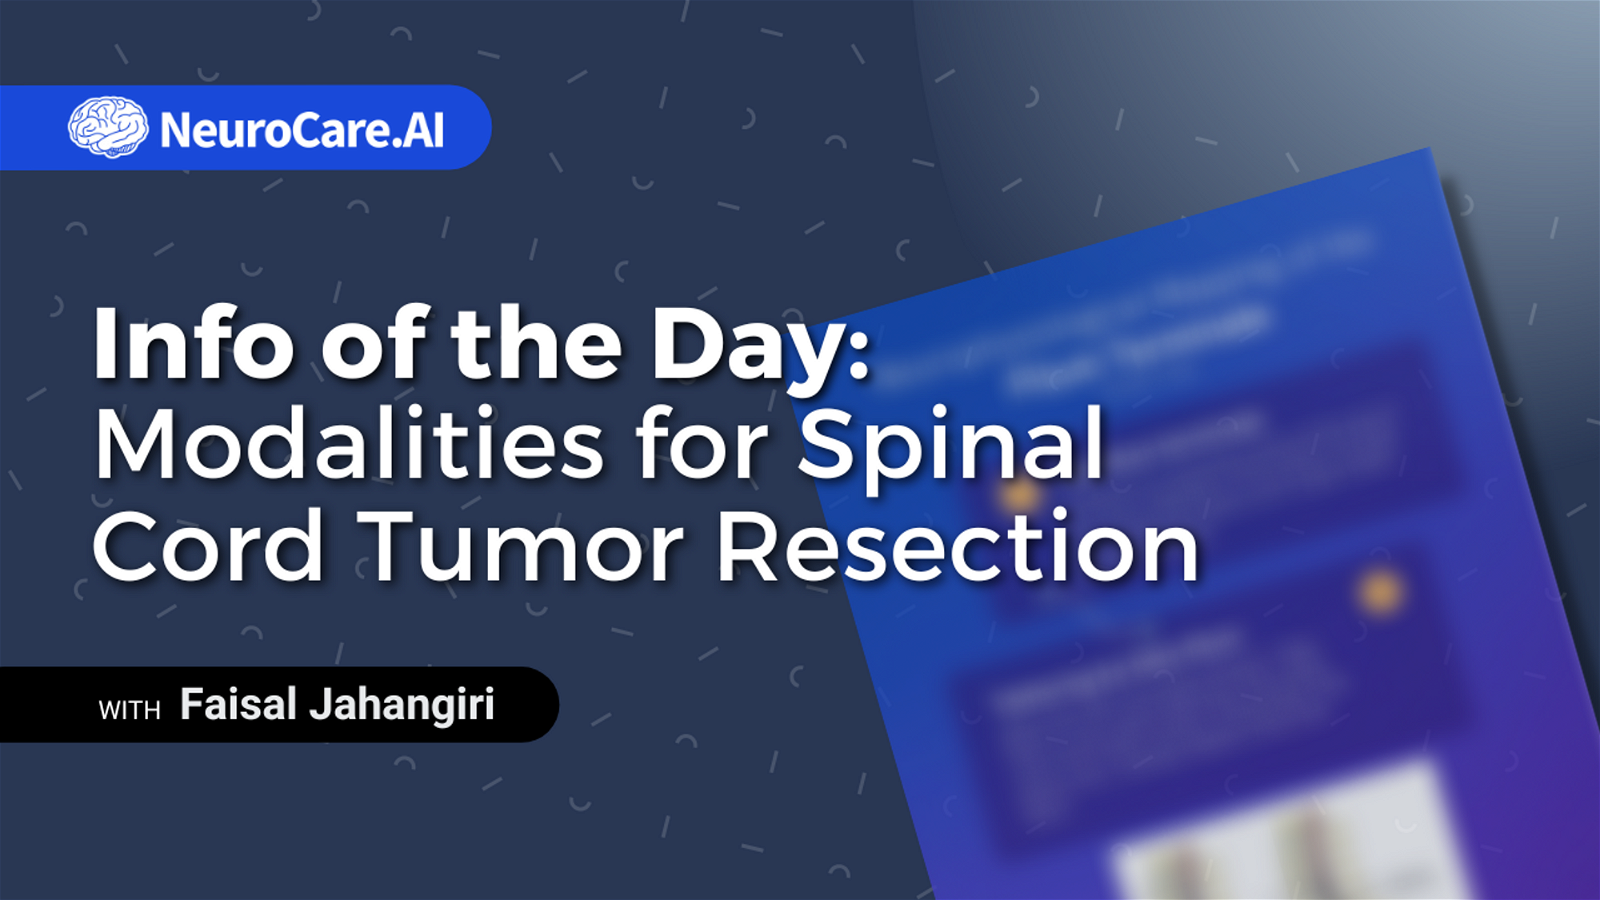 Info of the Day: "Modalities for Spinal Cord Tumor Resection"